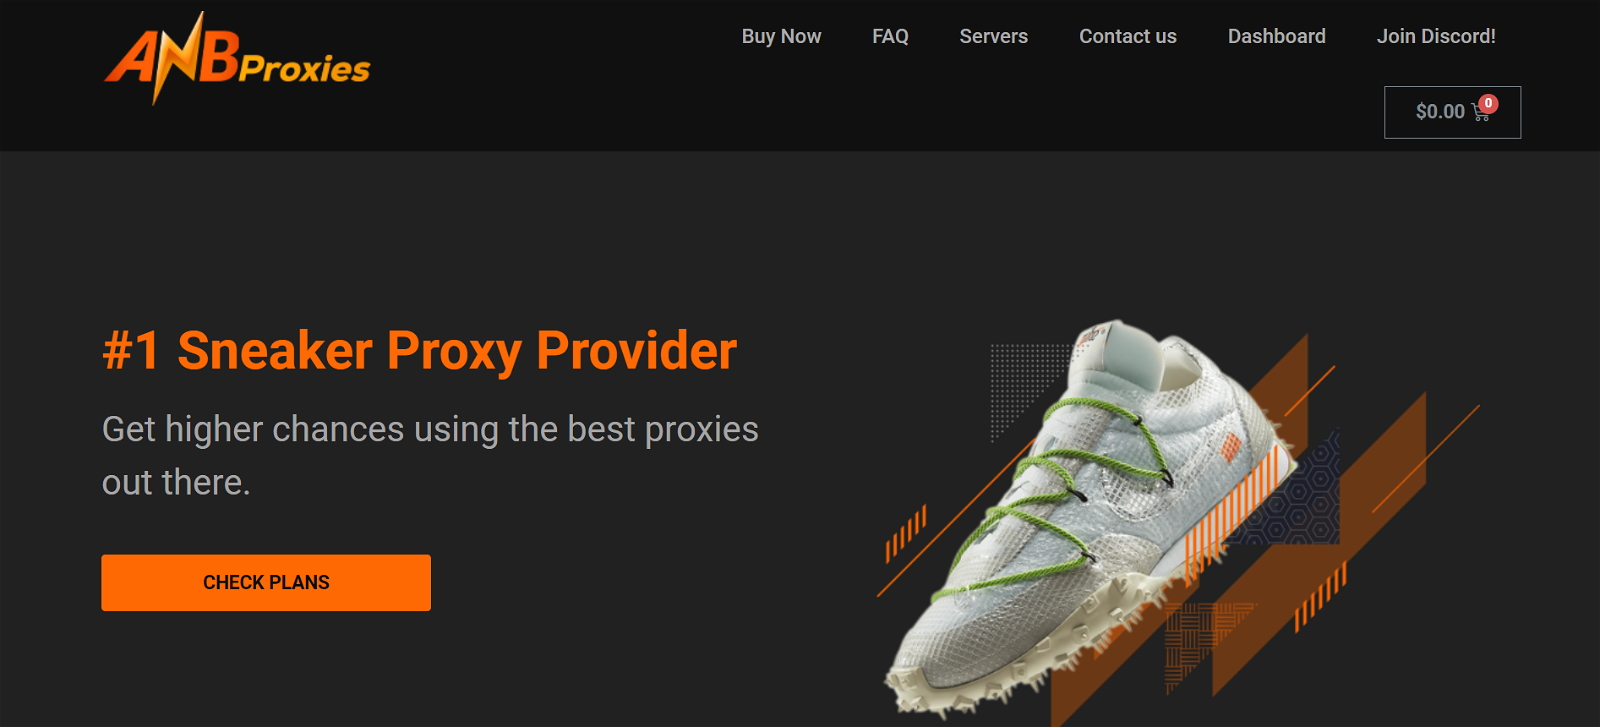 ANB Proxies sneaker proxy residential proxies datacenter